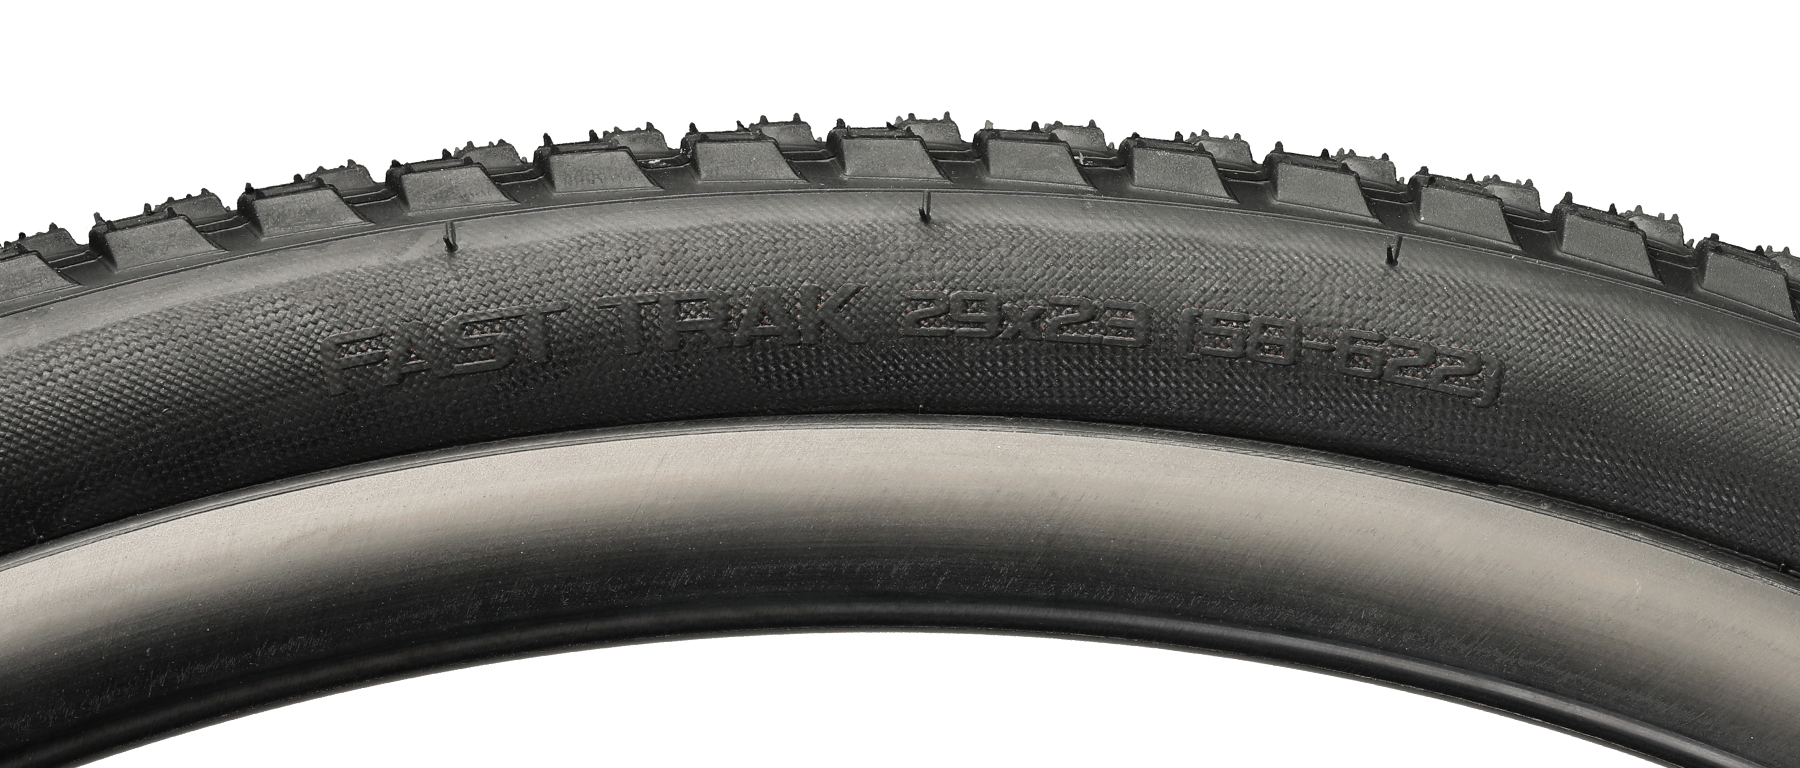 Specialized Fast Trak GRID 2Bliss Ready Tire